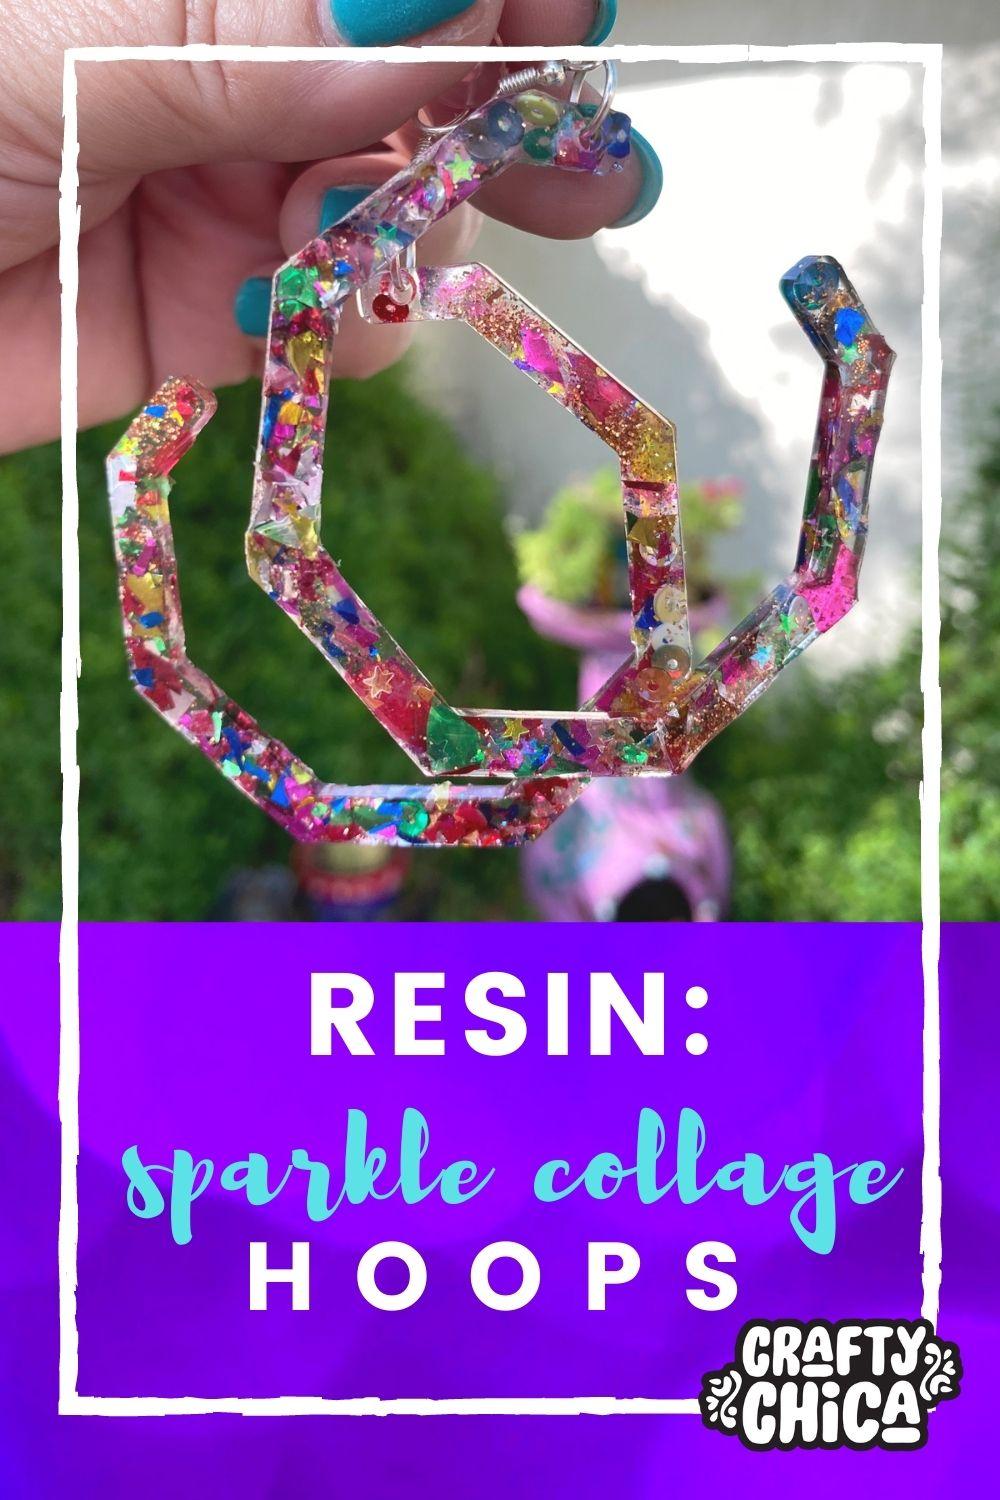 Resin Crafts: DIY Glitter Earrings - Sparkle Collage! - Crafty Chica